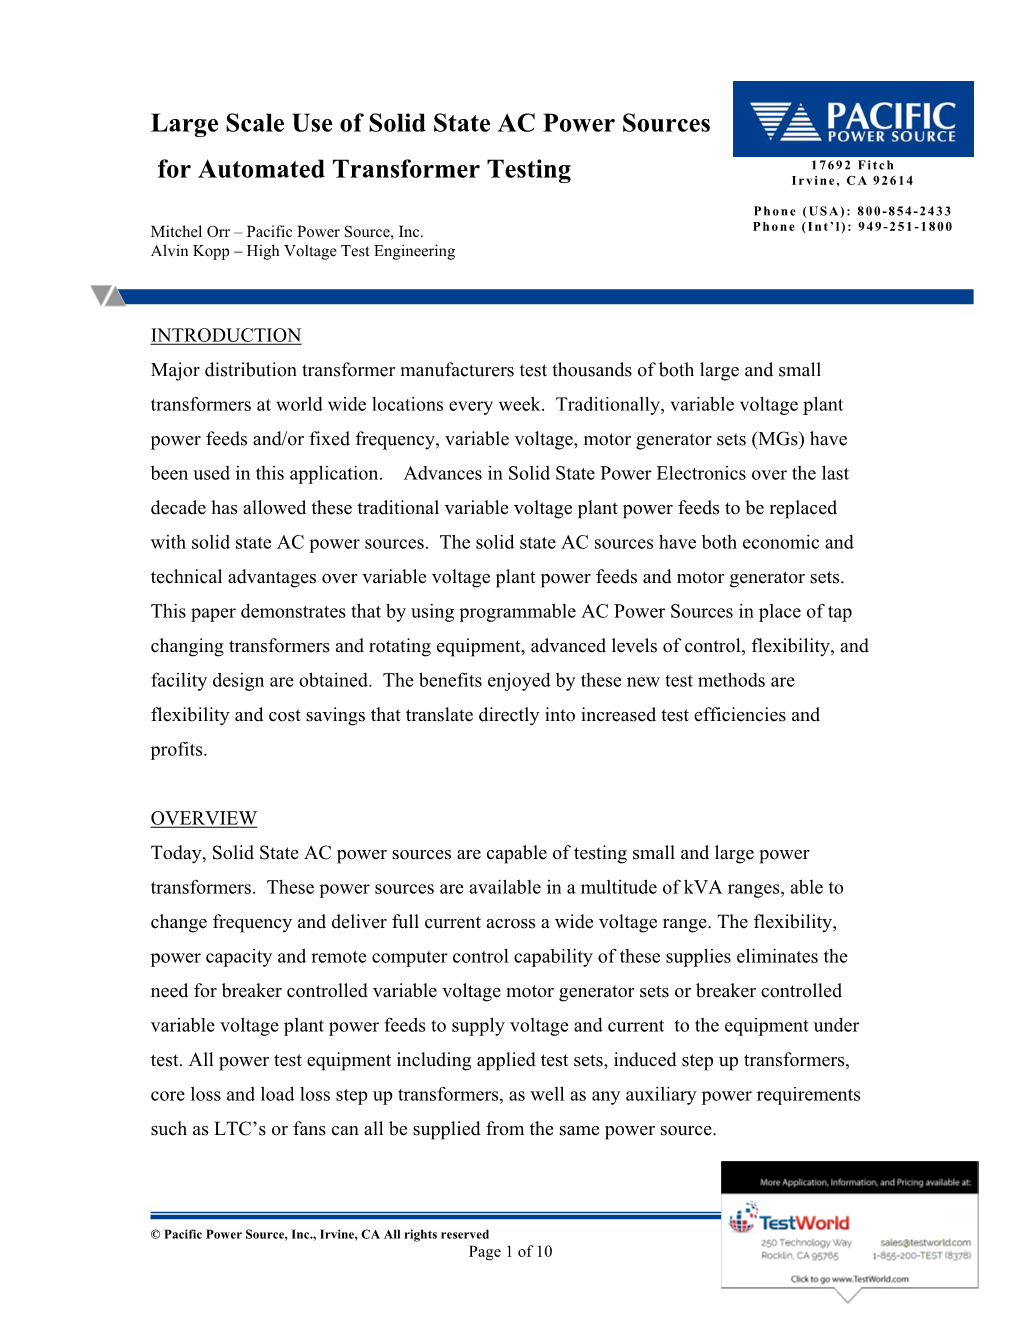 Large Scale Use of Solid State AC Power Sources for Automated Transformer Testing